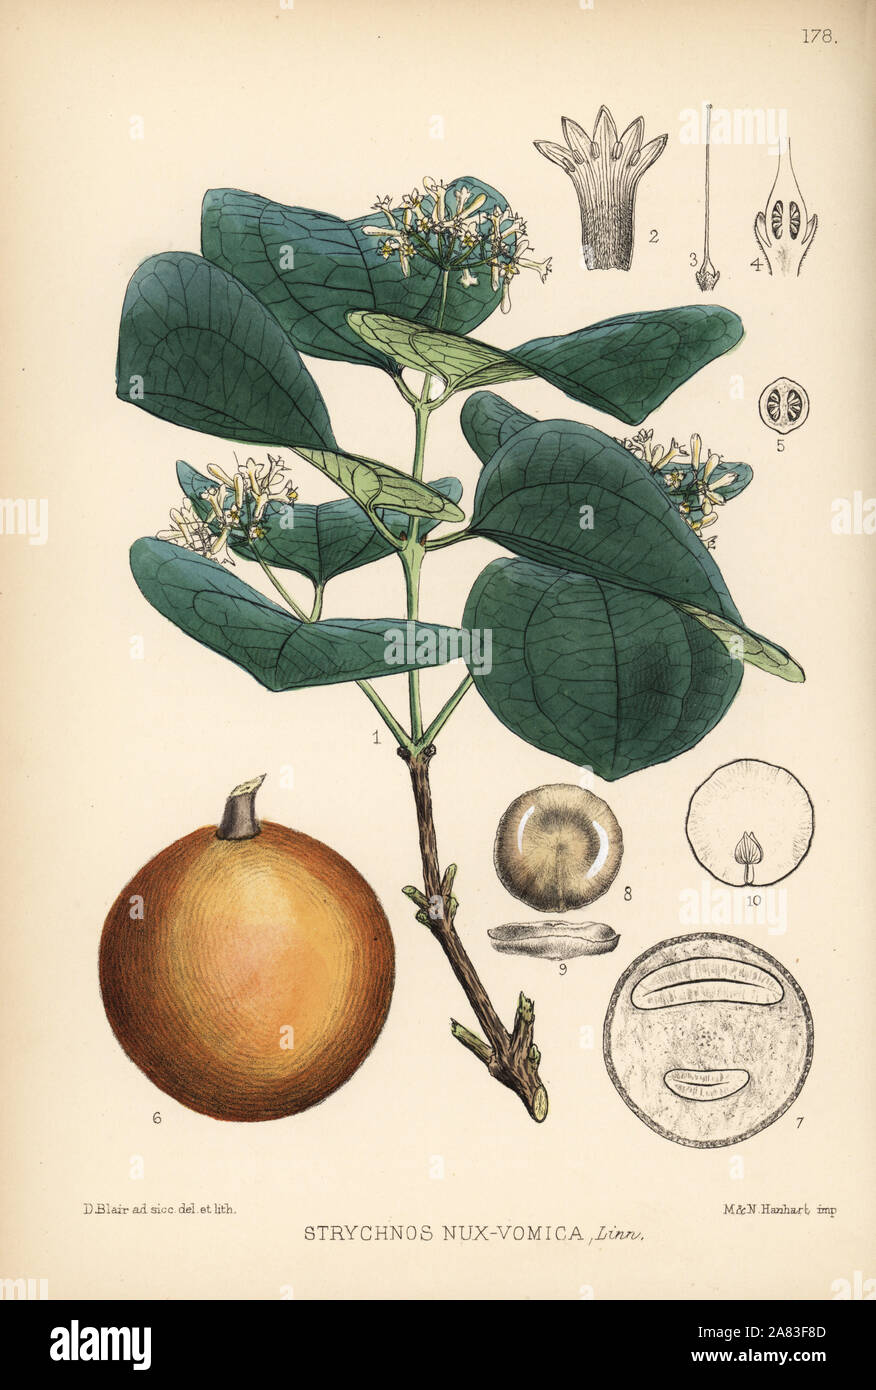 Poison nut or kuchila, Strychnos nux-vomica. Handcoloured lithograph by Hanhart after a botanical illustration by David Blair from Robert Bentley and Henry Trimen's Medicinal Plants, London, 1880. Stock Photo